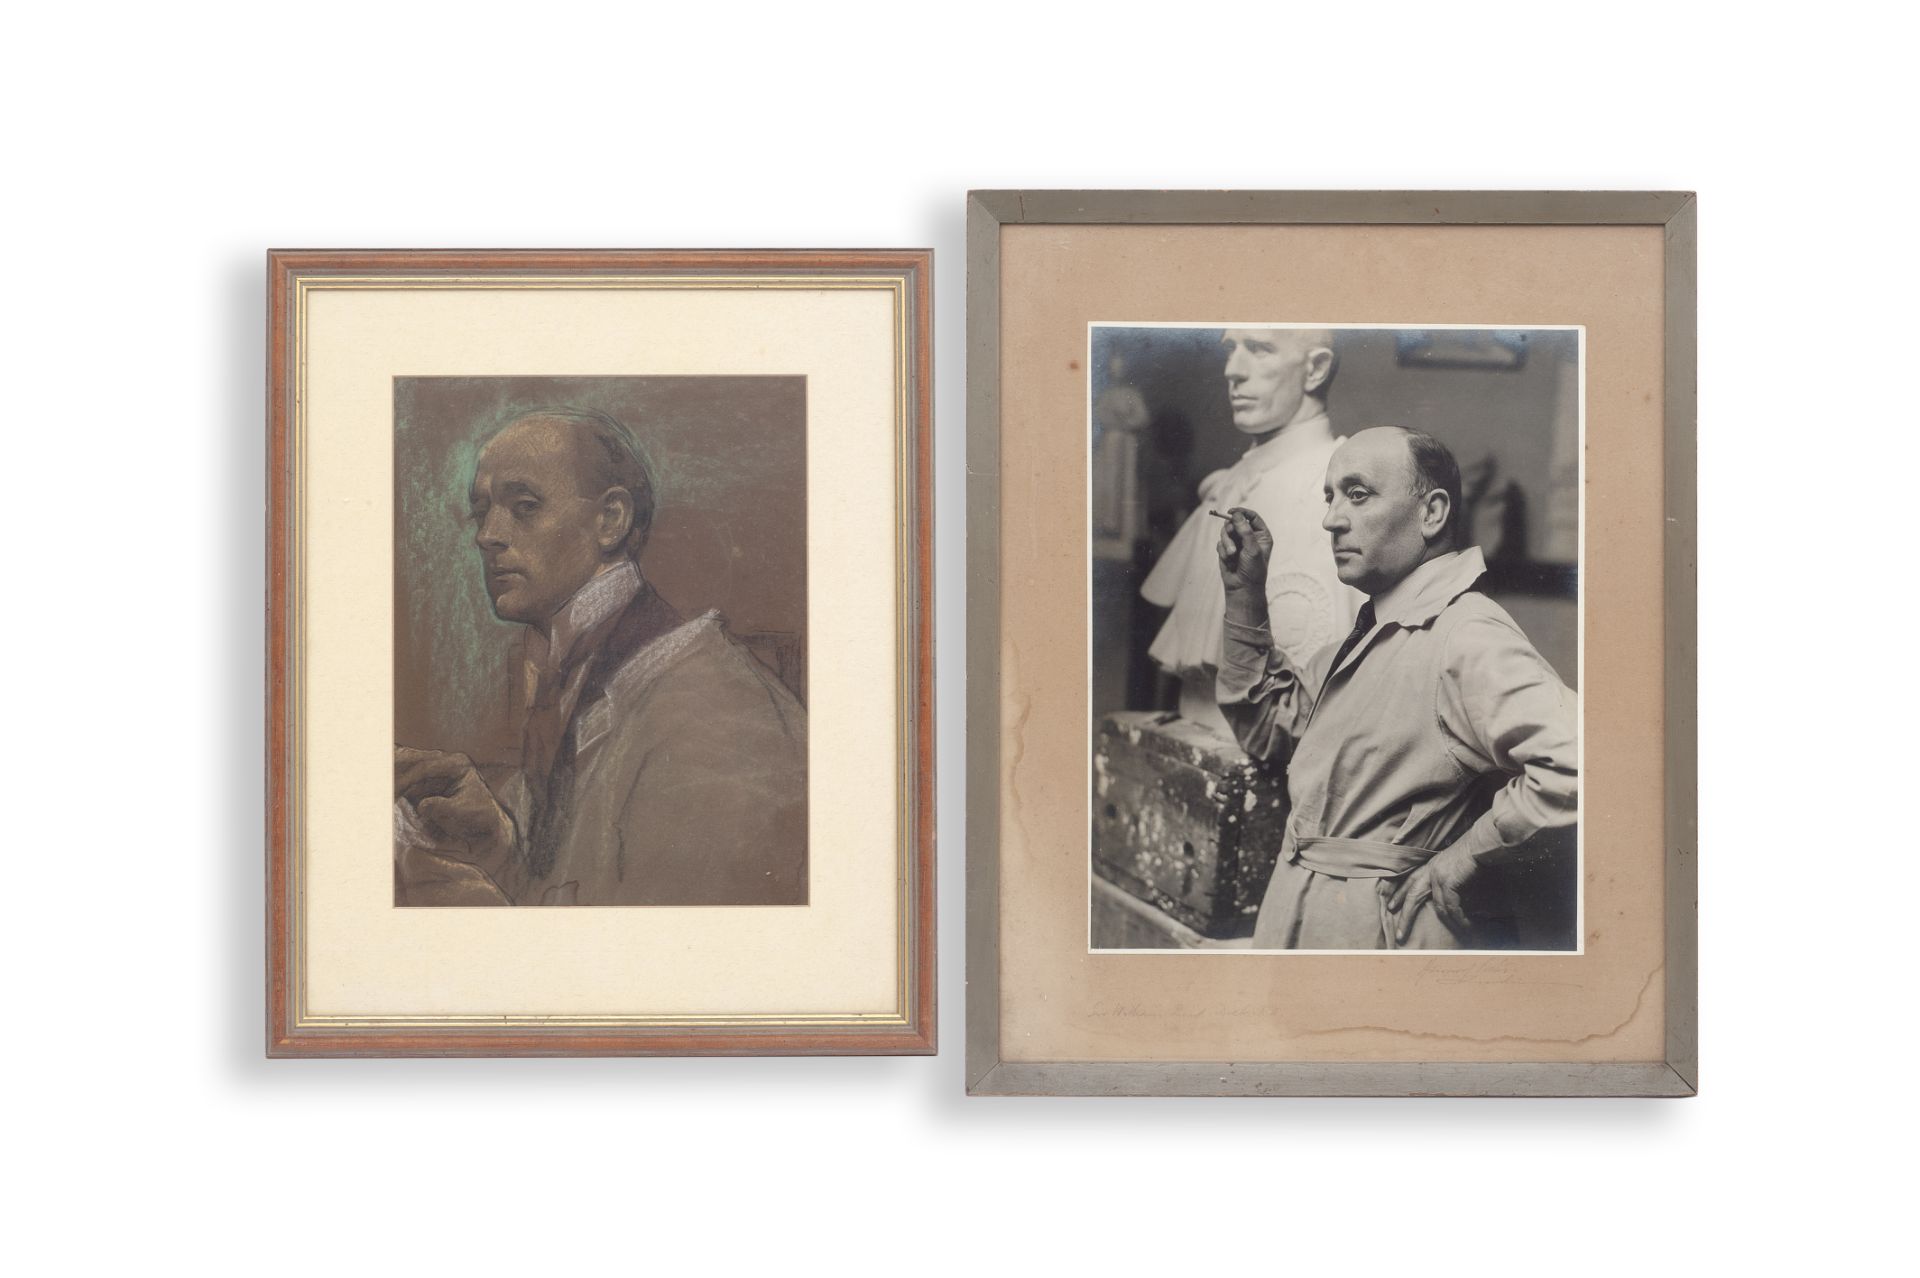 A PASTEL PORTRAIT OF SIR WILLIAM REID DICK R.A., TOGETHER WITH VARIOUS PORTRAIT PHOTOGRAPHS